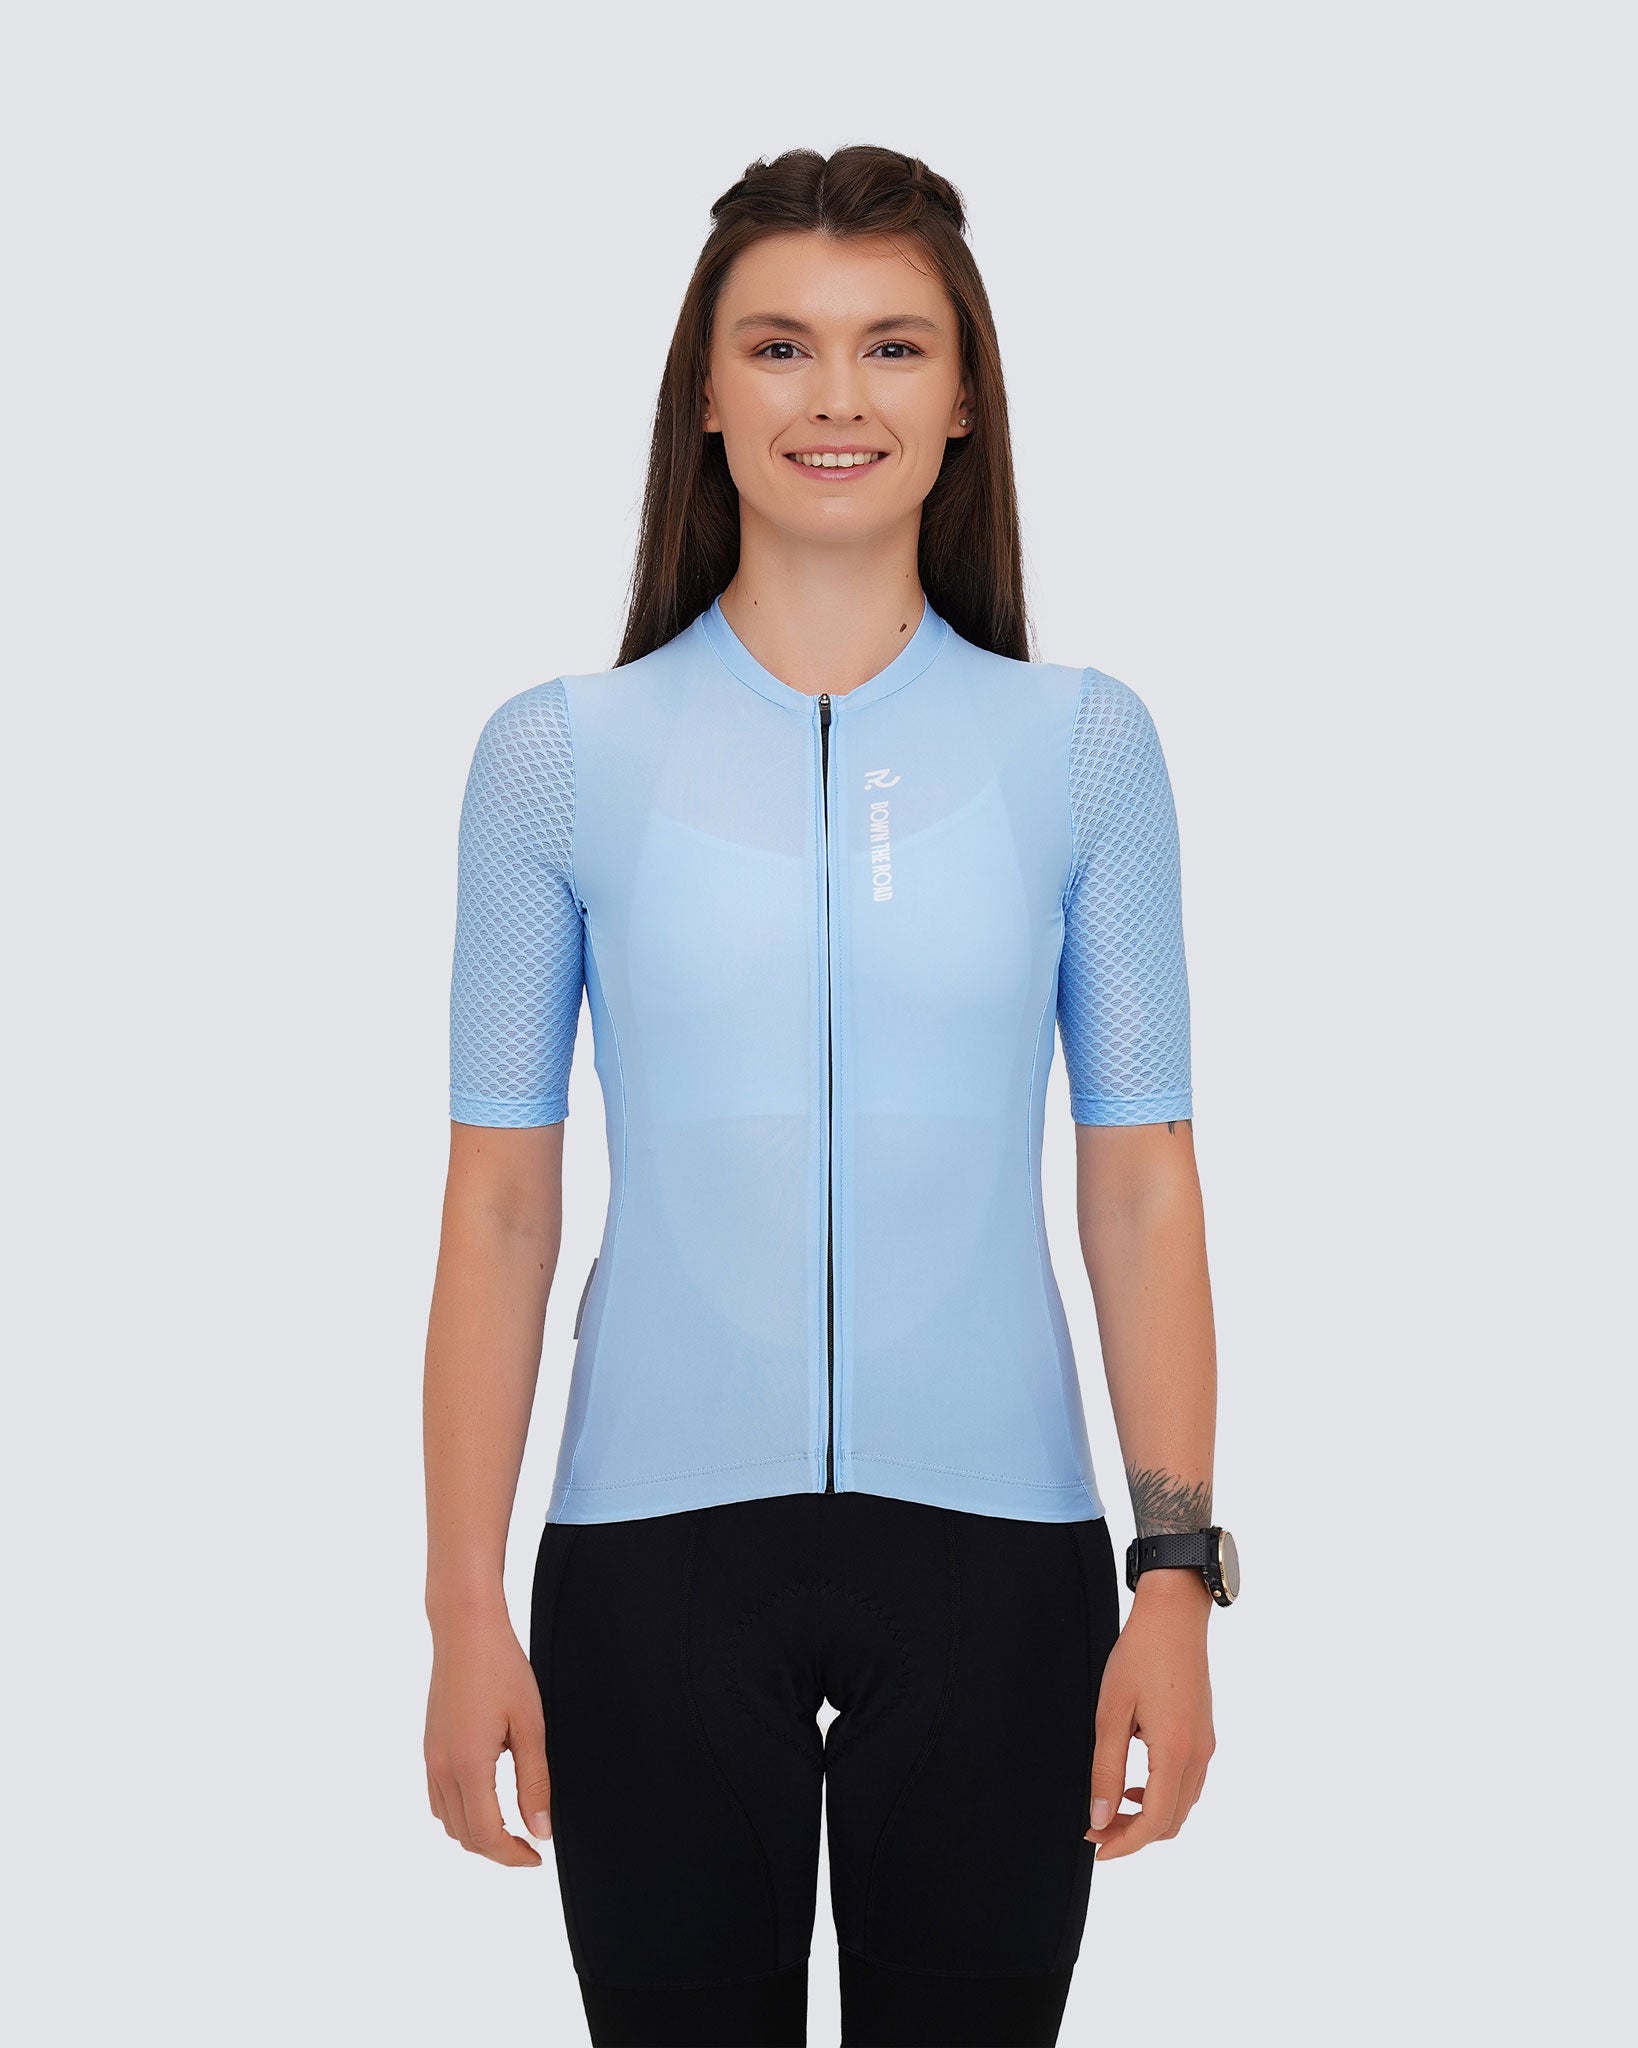 nature blue classics women cycling jersey front view